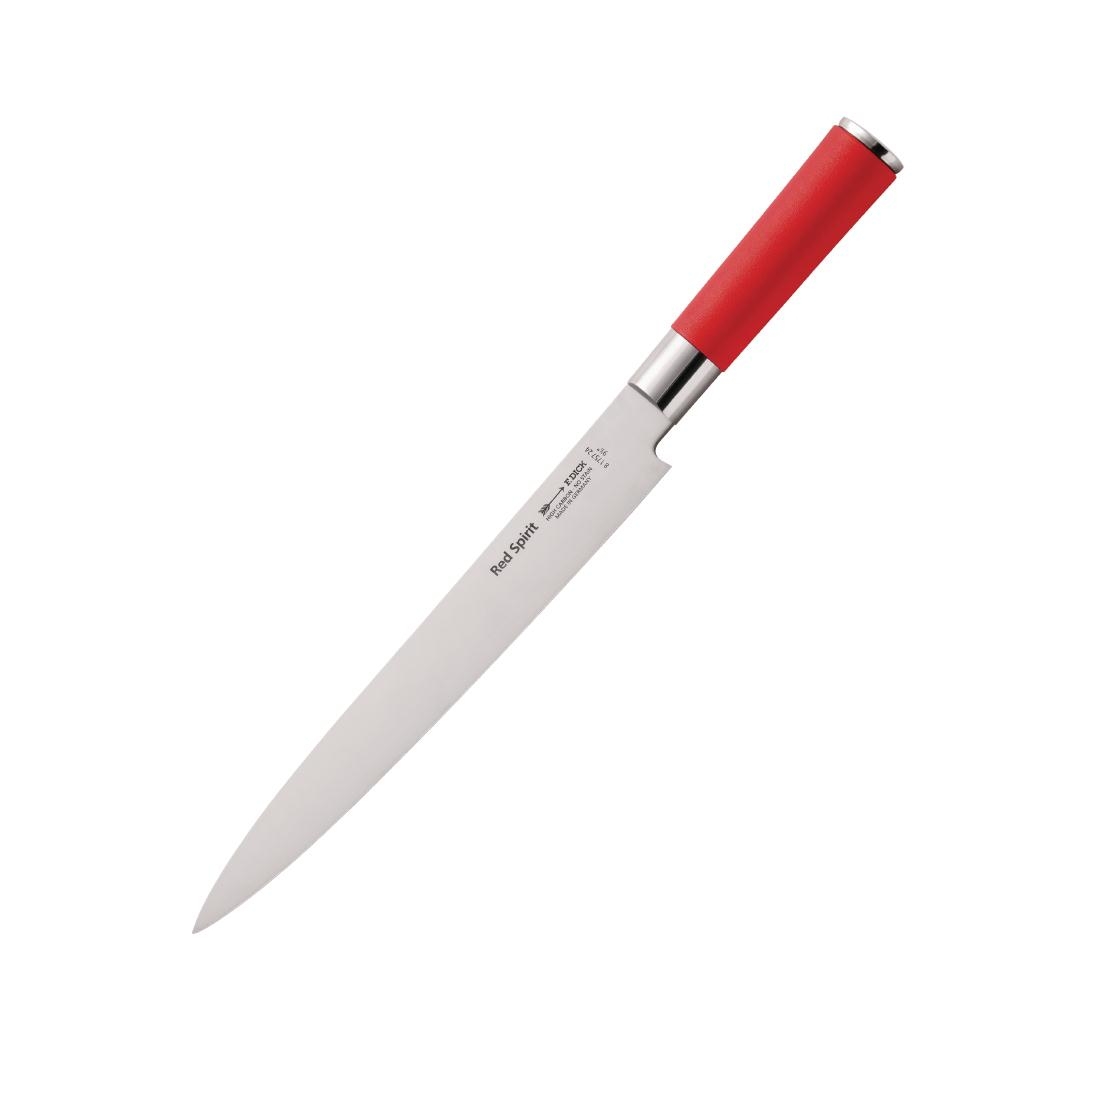 Dick Red Spirit Yanagiba Carving and Sushi Knife 24cm